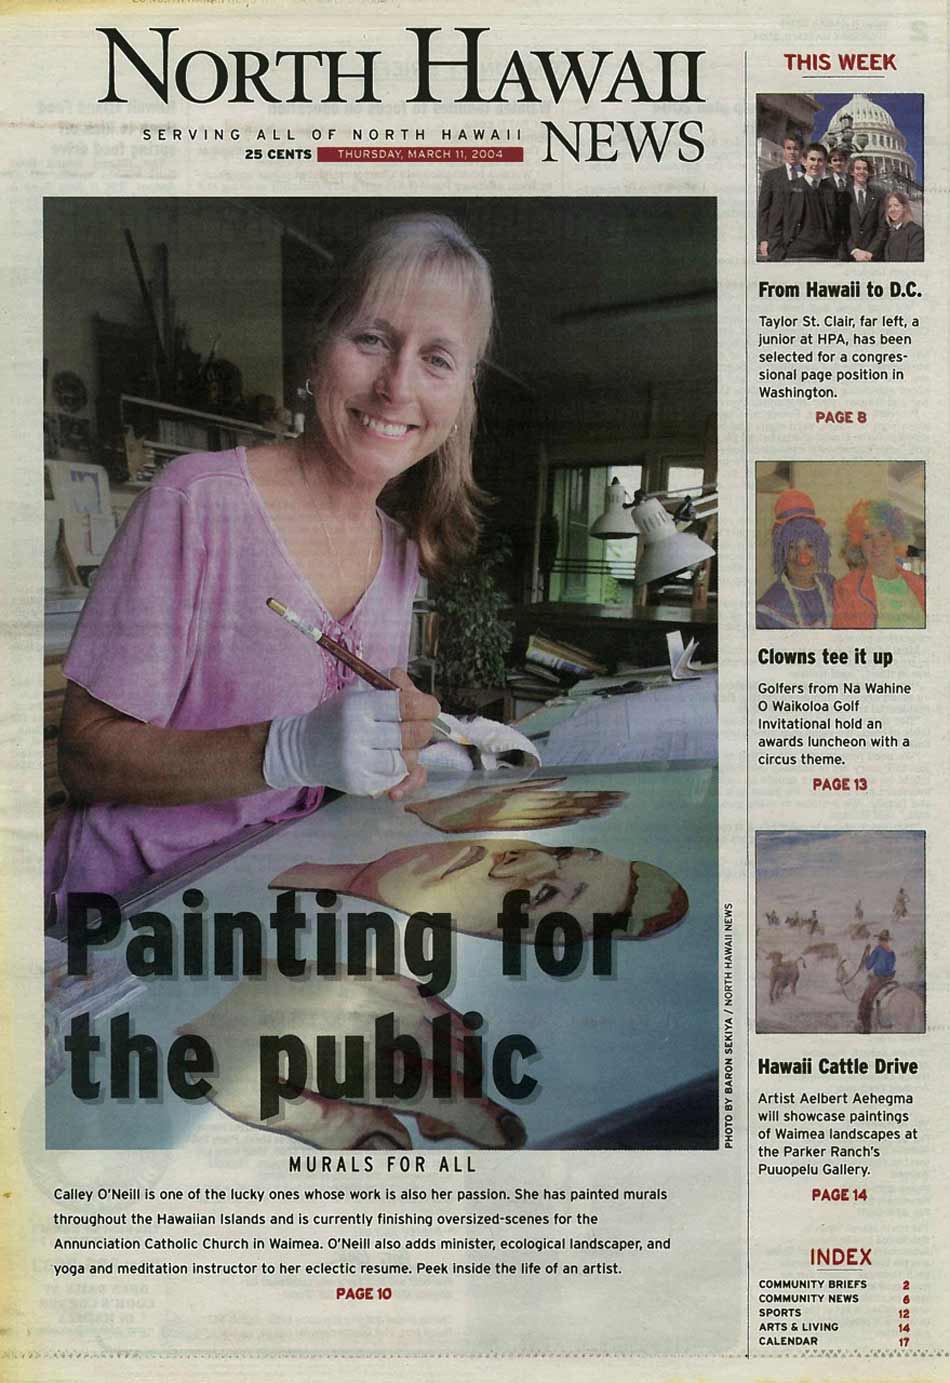 Calley O'Neill is one of the lucky ones whose work is also her passion.  She has painted murals throughout the Hawaiian Islands and is currently finishing oversized scenes for the Annunciation Catholic Church in Waimea.